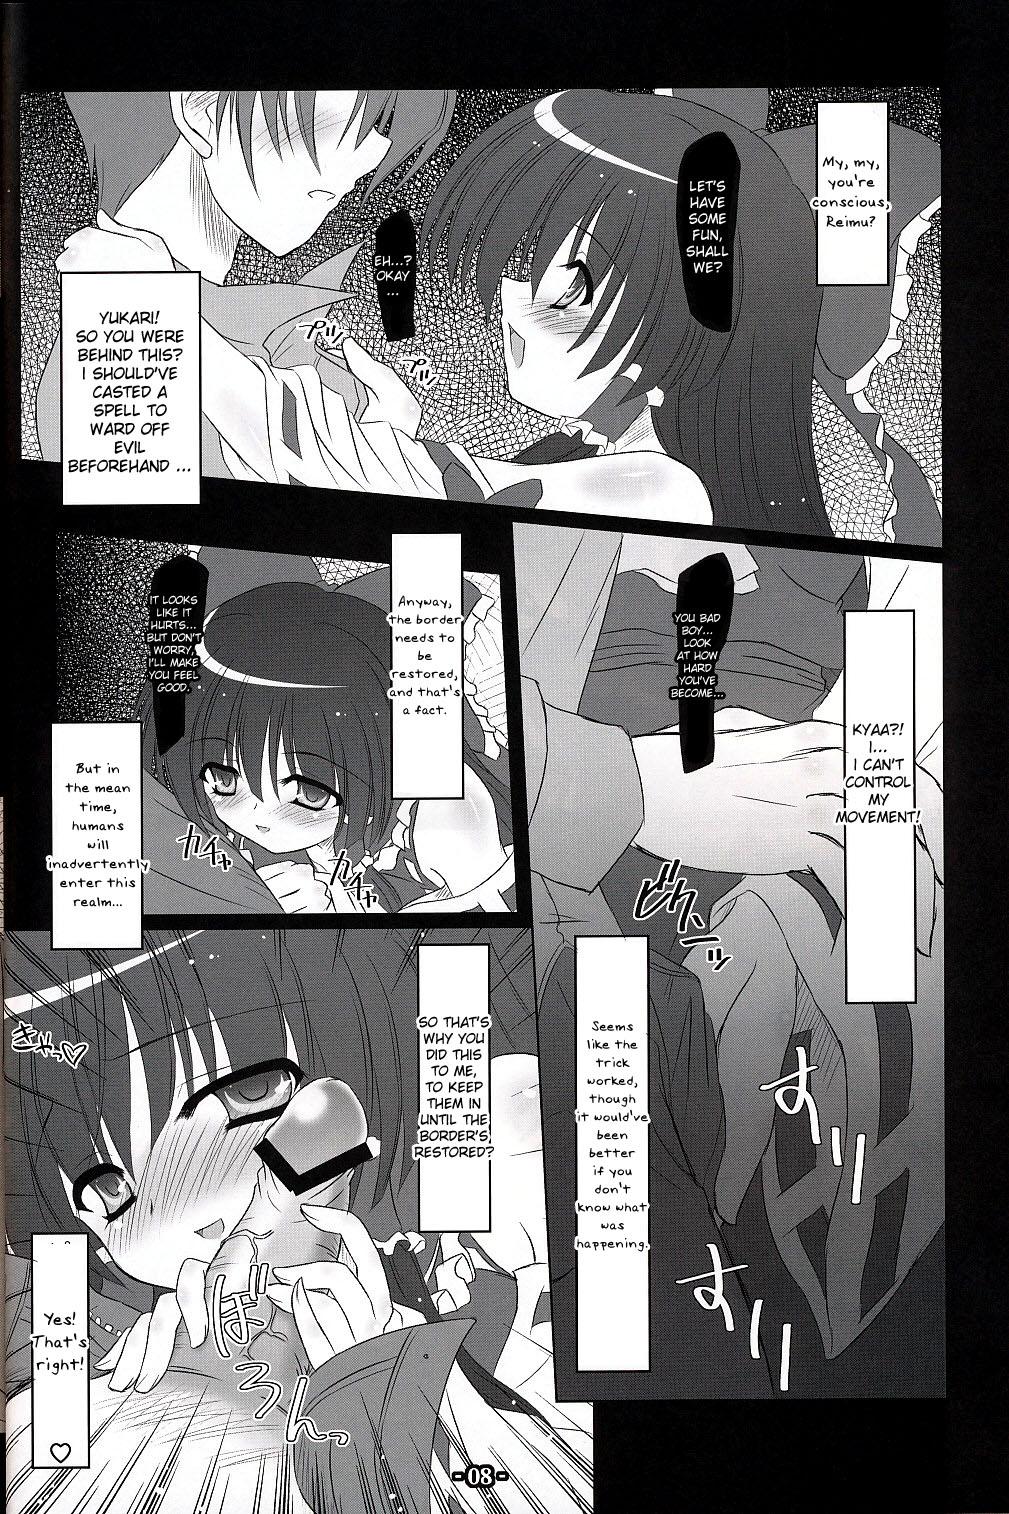 Letsdoeit Musou Fuuin - Touhou project Ballbusting - Page 7